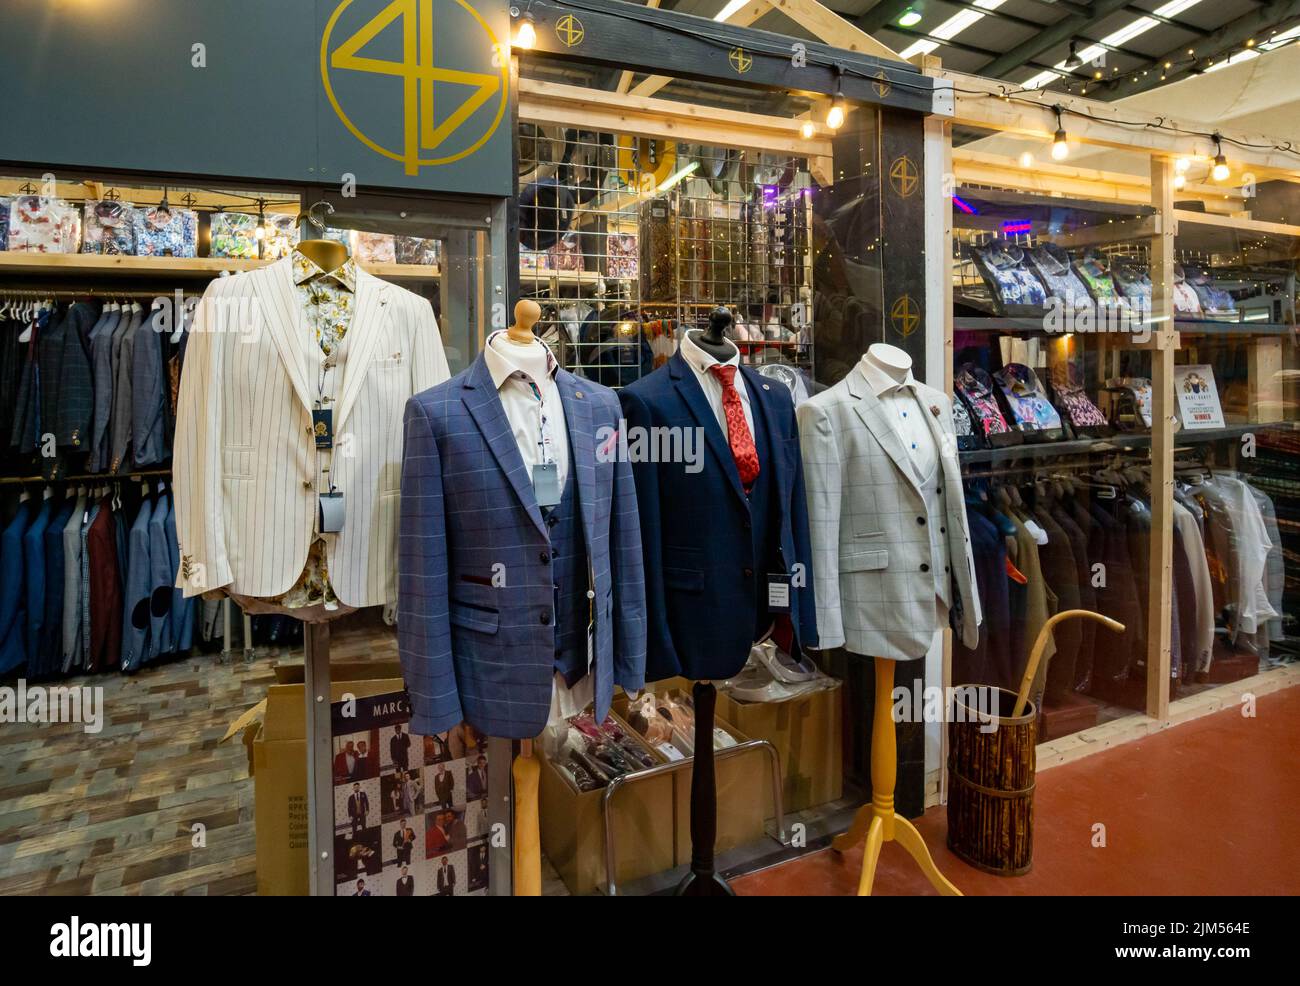 Men's clothing shop in Red Brick market, Baltic Triangle, Liverpool Stock Photo